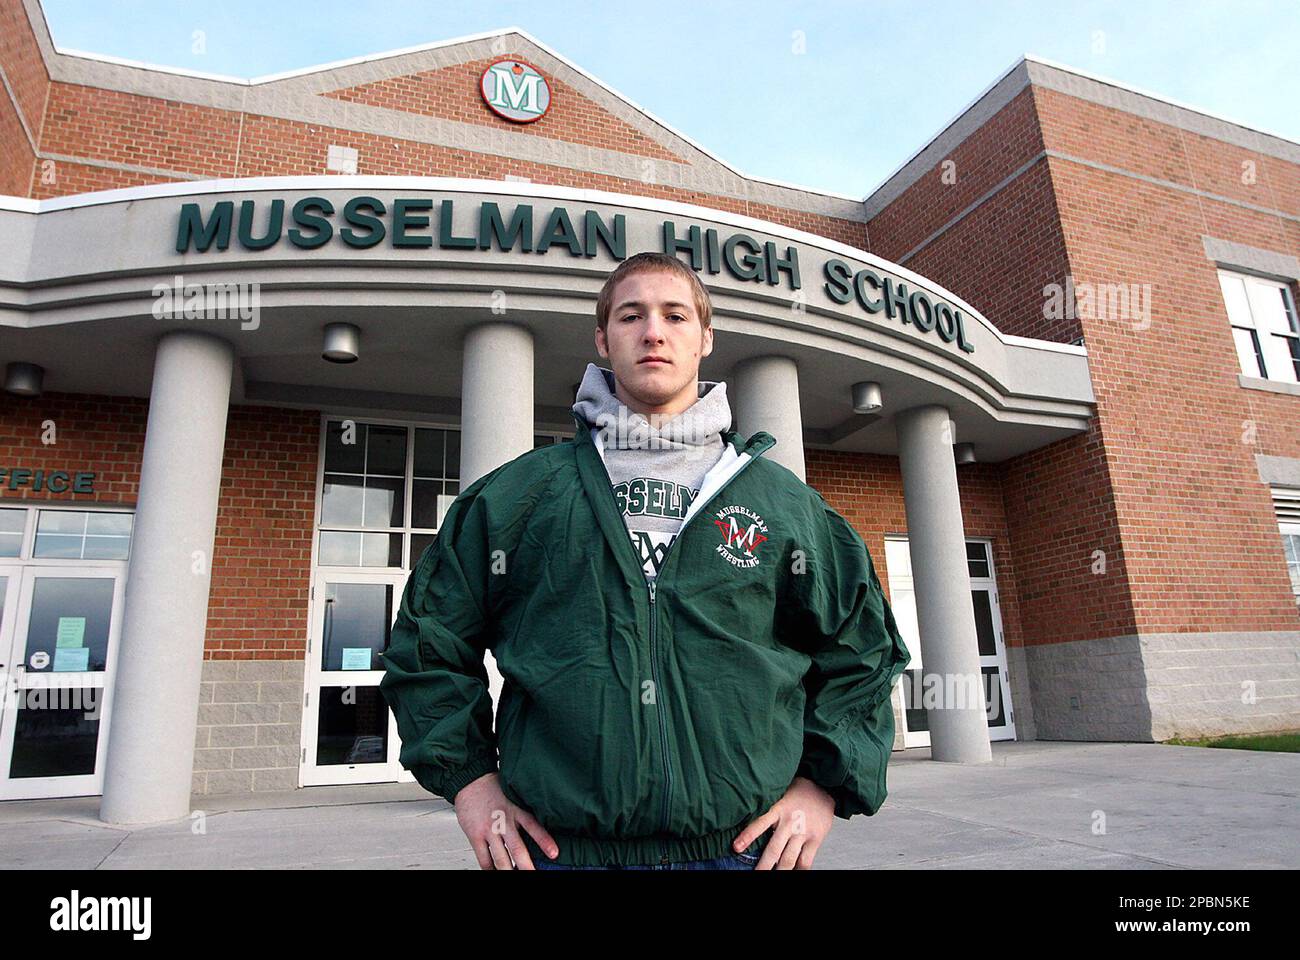 Three-time state wrestling champion Dustin Haislip at Musselman High School  is shown Saturday, April 7, 2007, in Inwood, W.Va. Haislip has been awarded  the 23rd annual Robert Dutton Award. (AP Photo/The Journal,